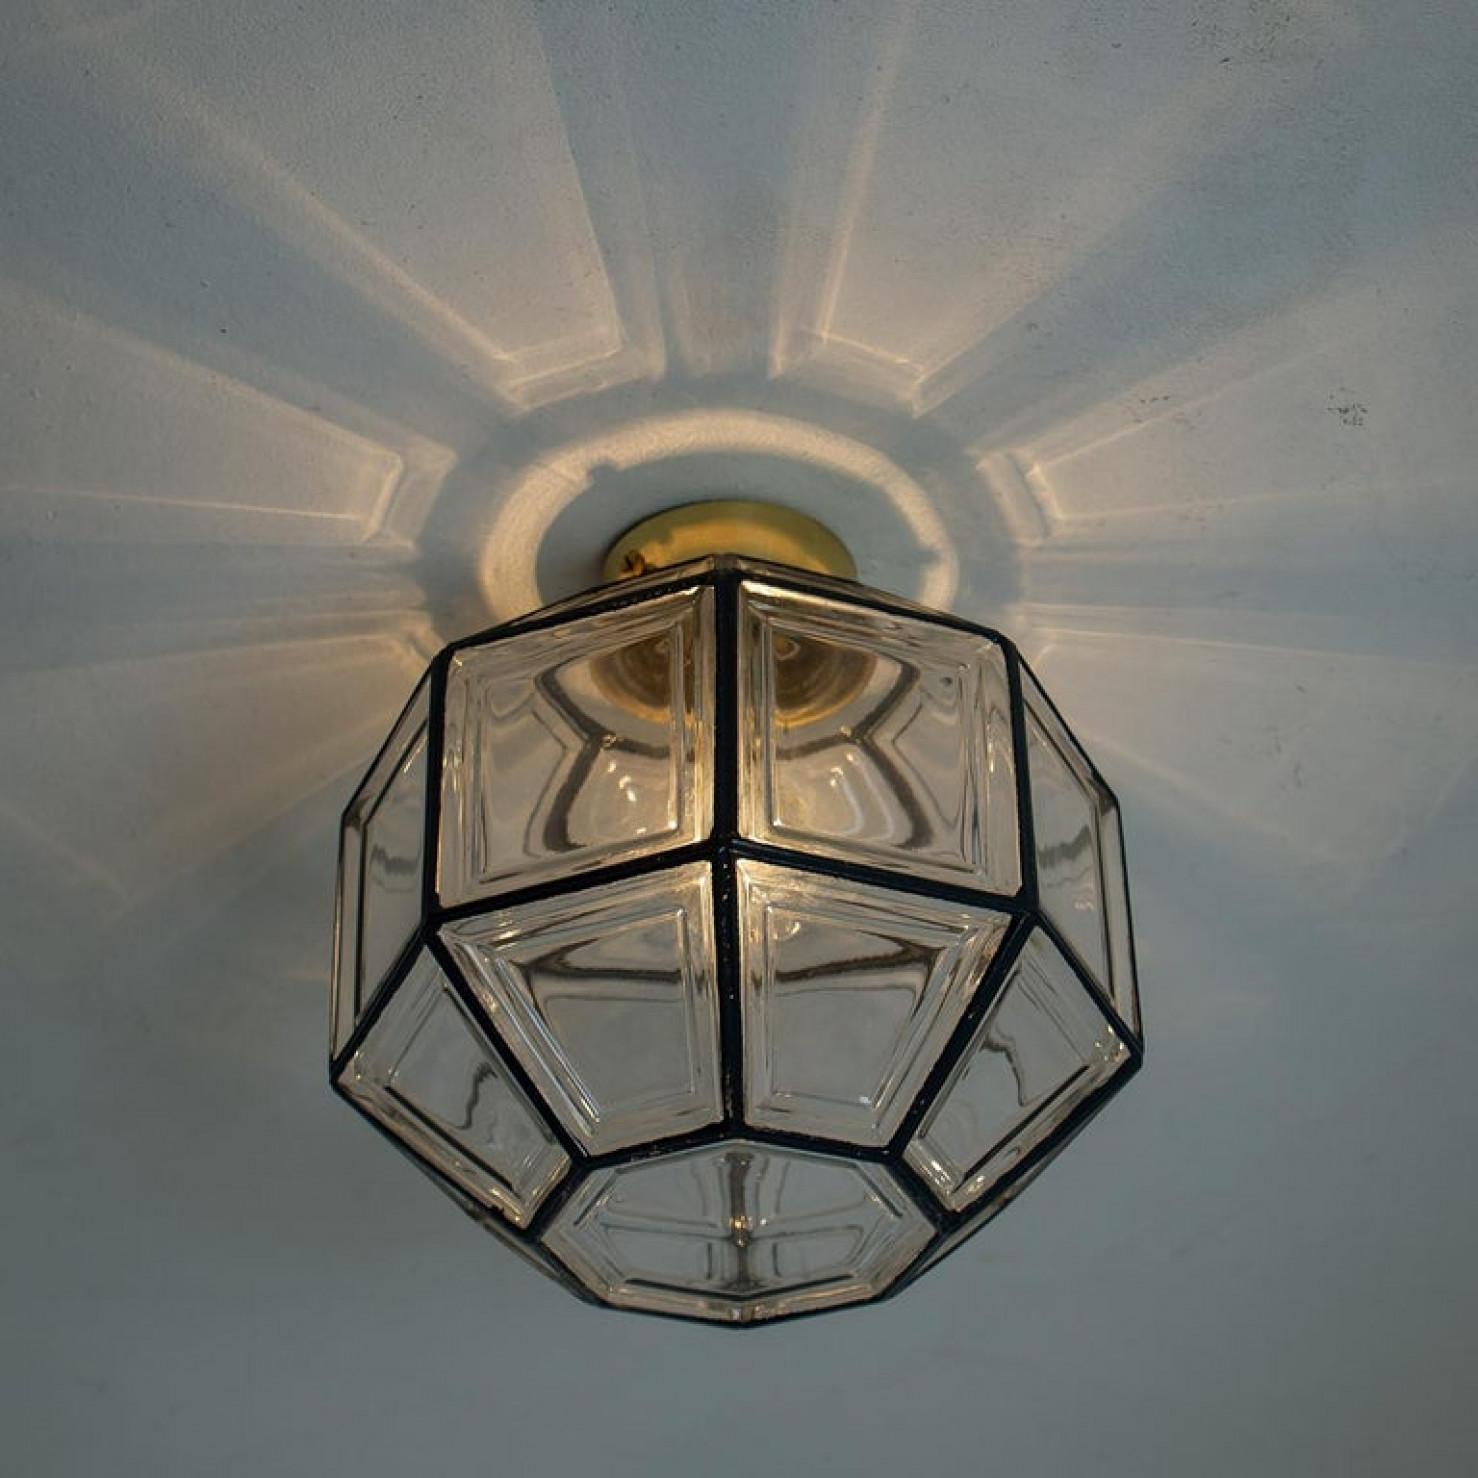 Several octagonal glass light flush mounts or wall lights were manufactured by Glashütte Limburg in Germany during the 1970s. Beautiful craftsmanship. Illuminates beautifully. The come from an old grand hotel in Germany.

Please note the price is